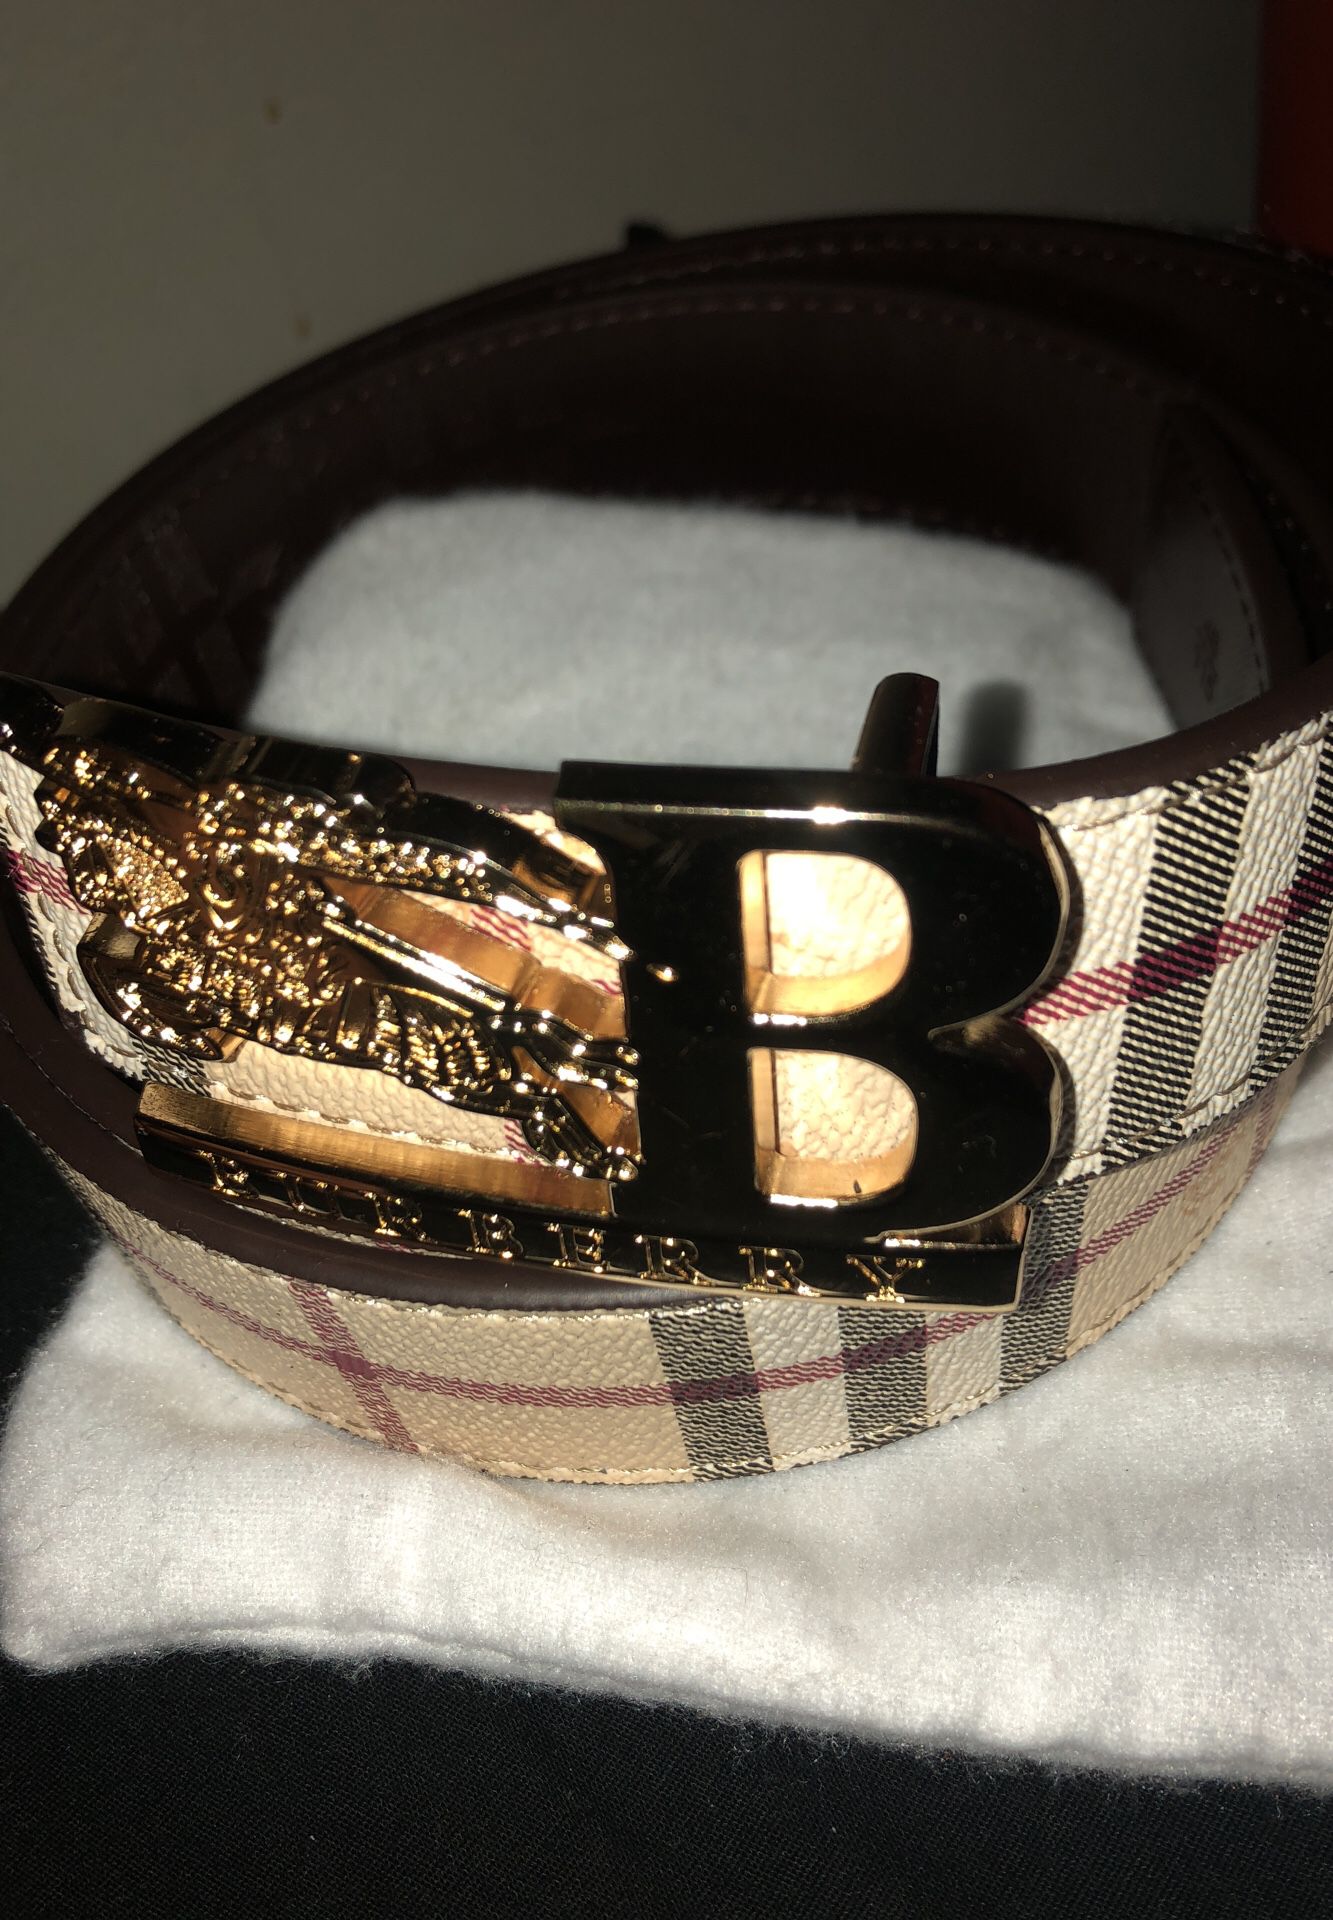 Know what your buying Burberry belt size 34 waist